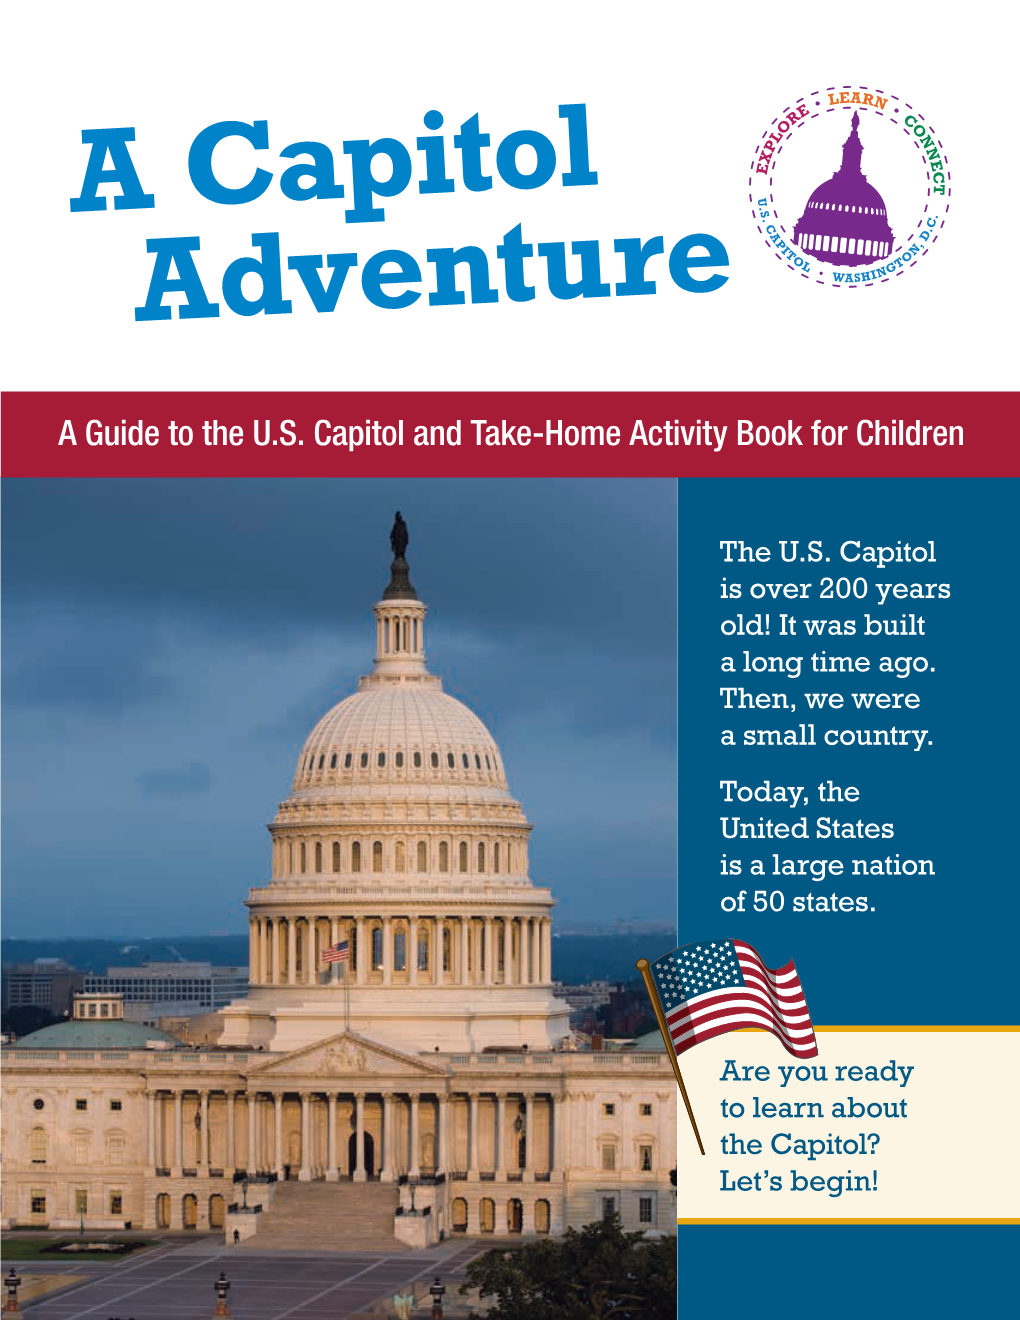 A Guide to the U.S. Capitol and Take-Home Activity Book for Children